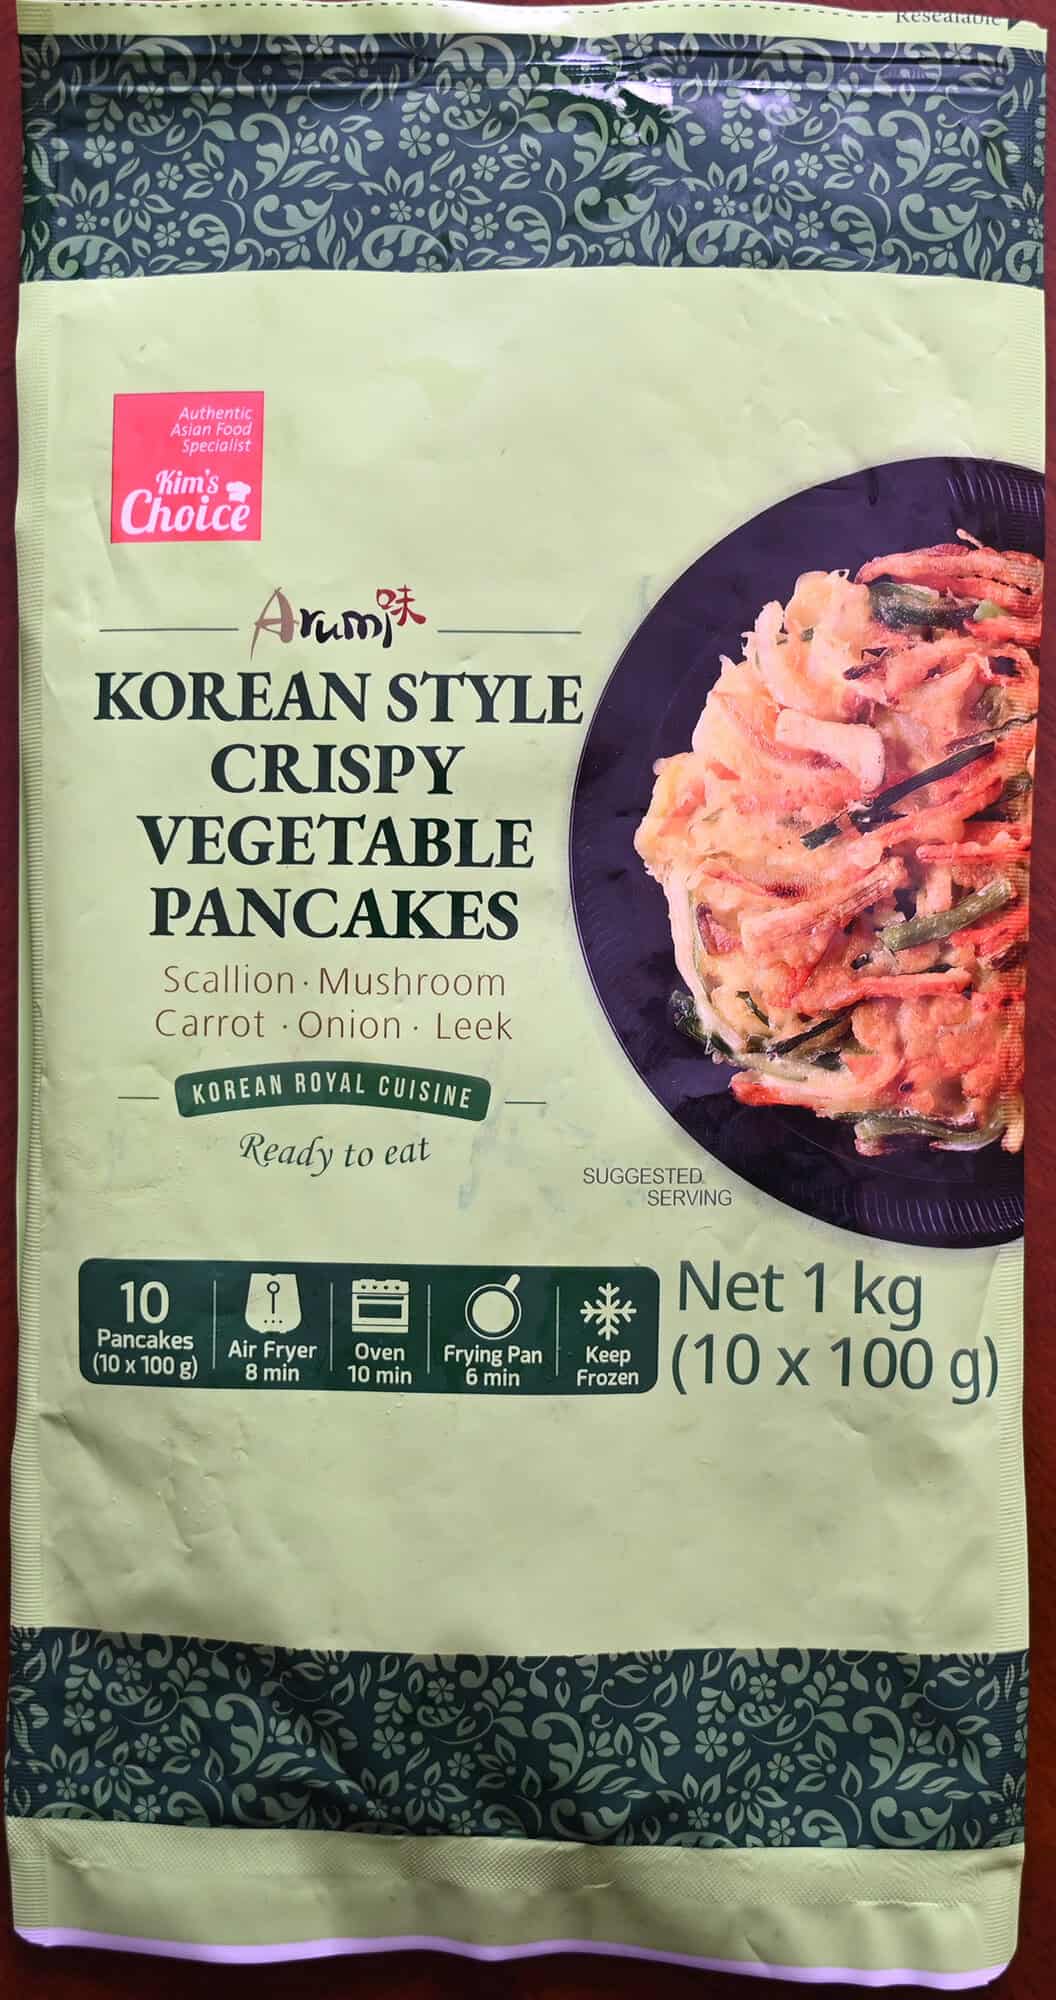 Closeup image of the front of the bag of pancakes showing the weight of the bag and that it contains 10 pancakes.